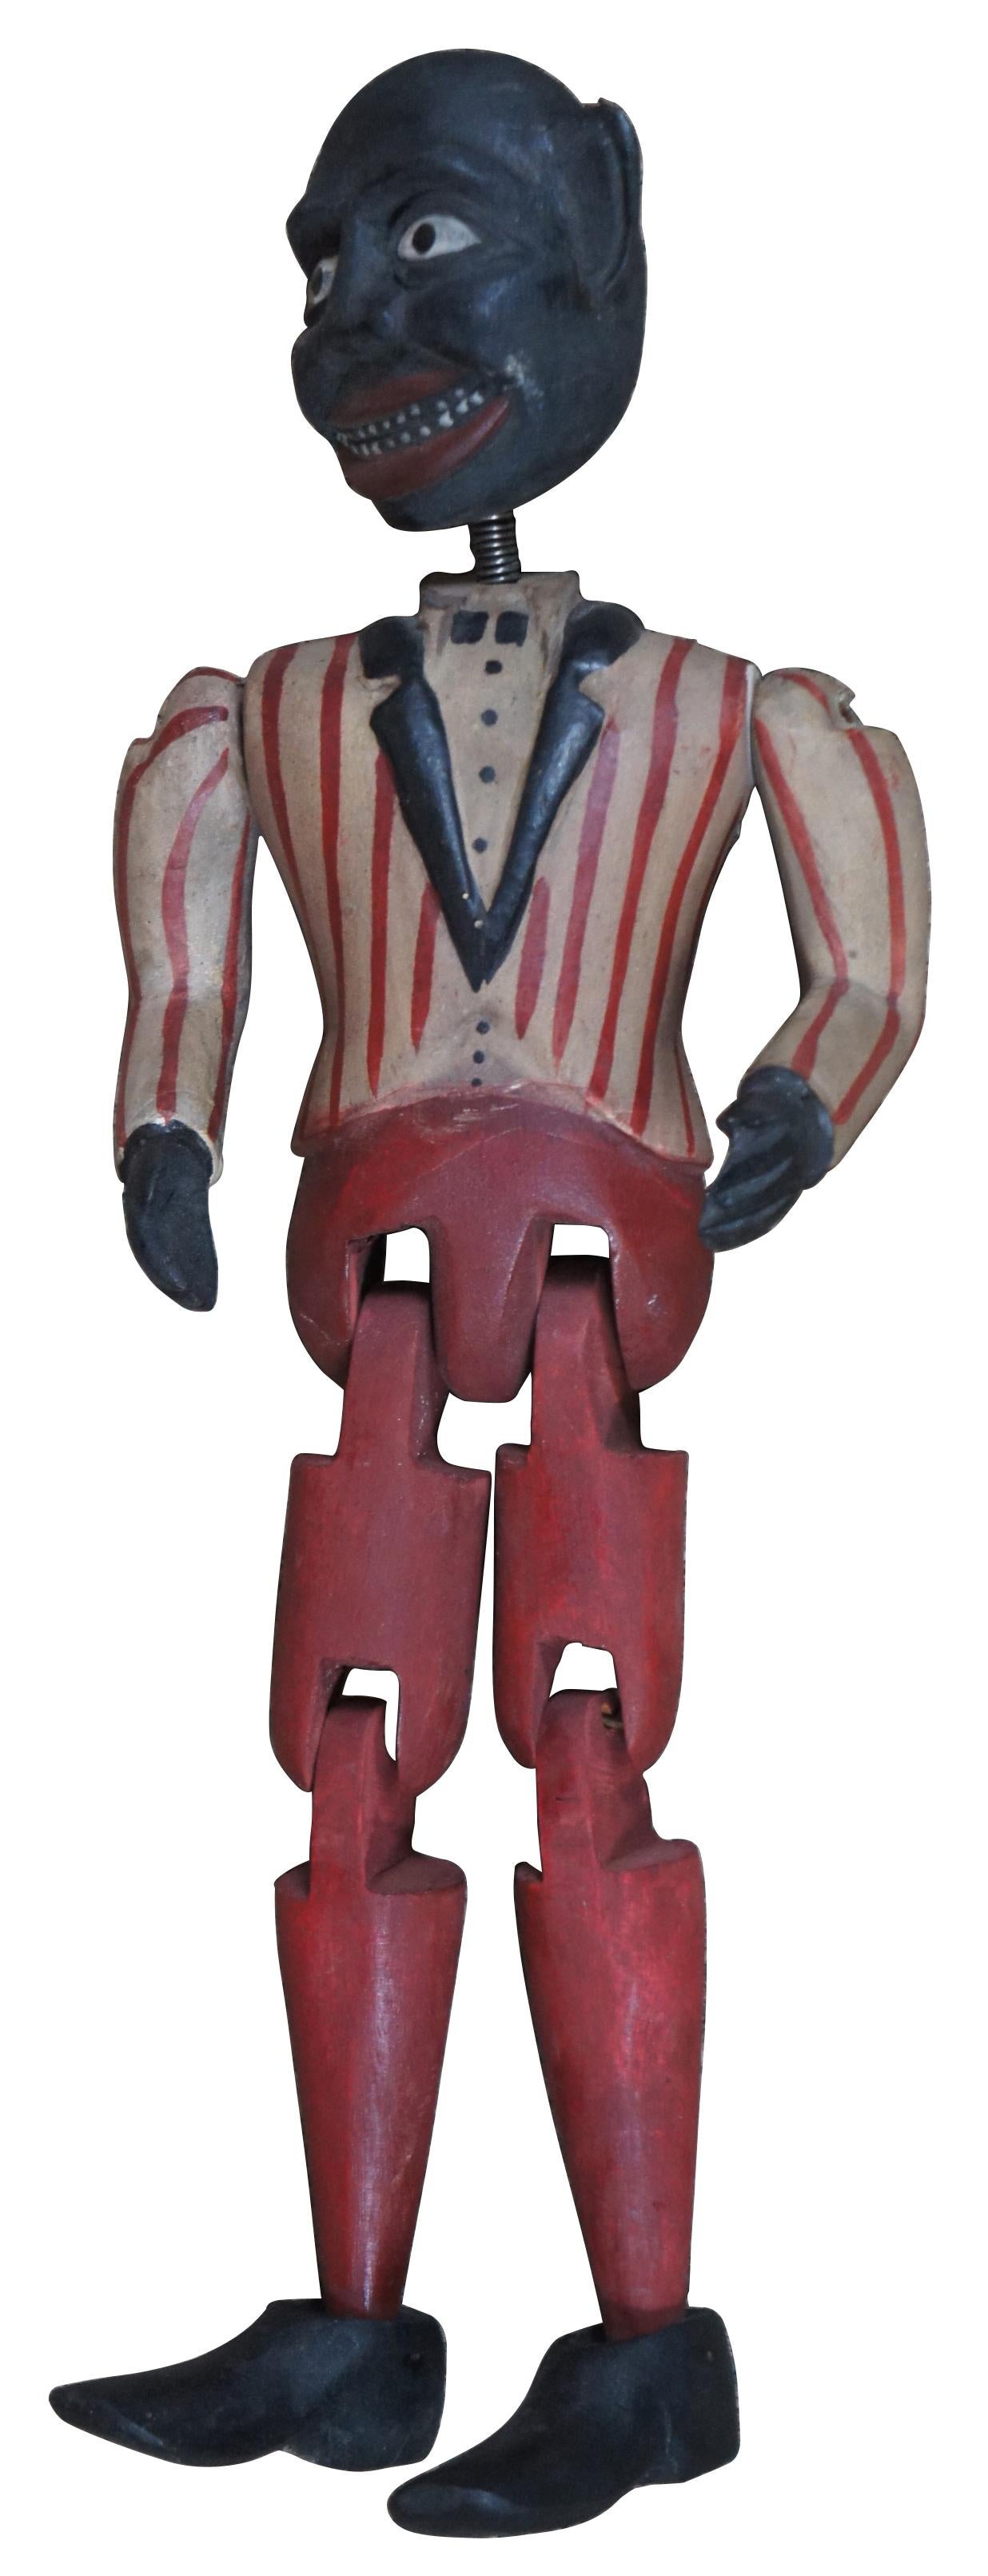 Vintage Americana, folk art style hand carved wooden jig or limberjack toy doll, dancing Minstrel puppet, with spring mounted bobble head and red, white, and black painted / striped tuxedo. Measure: 13